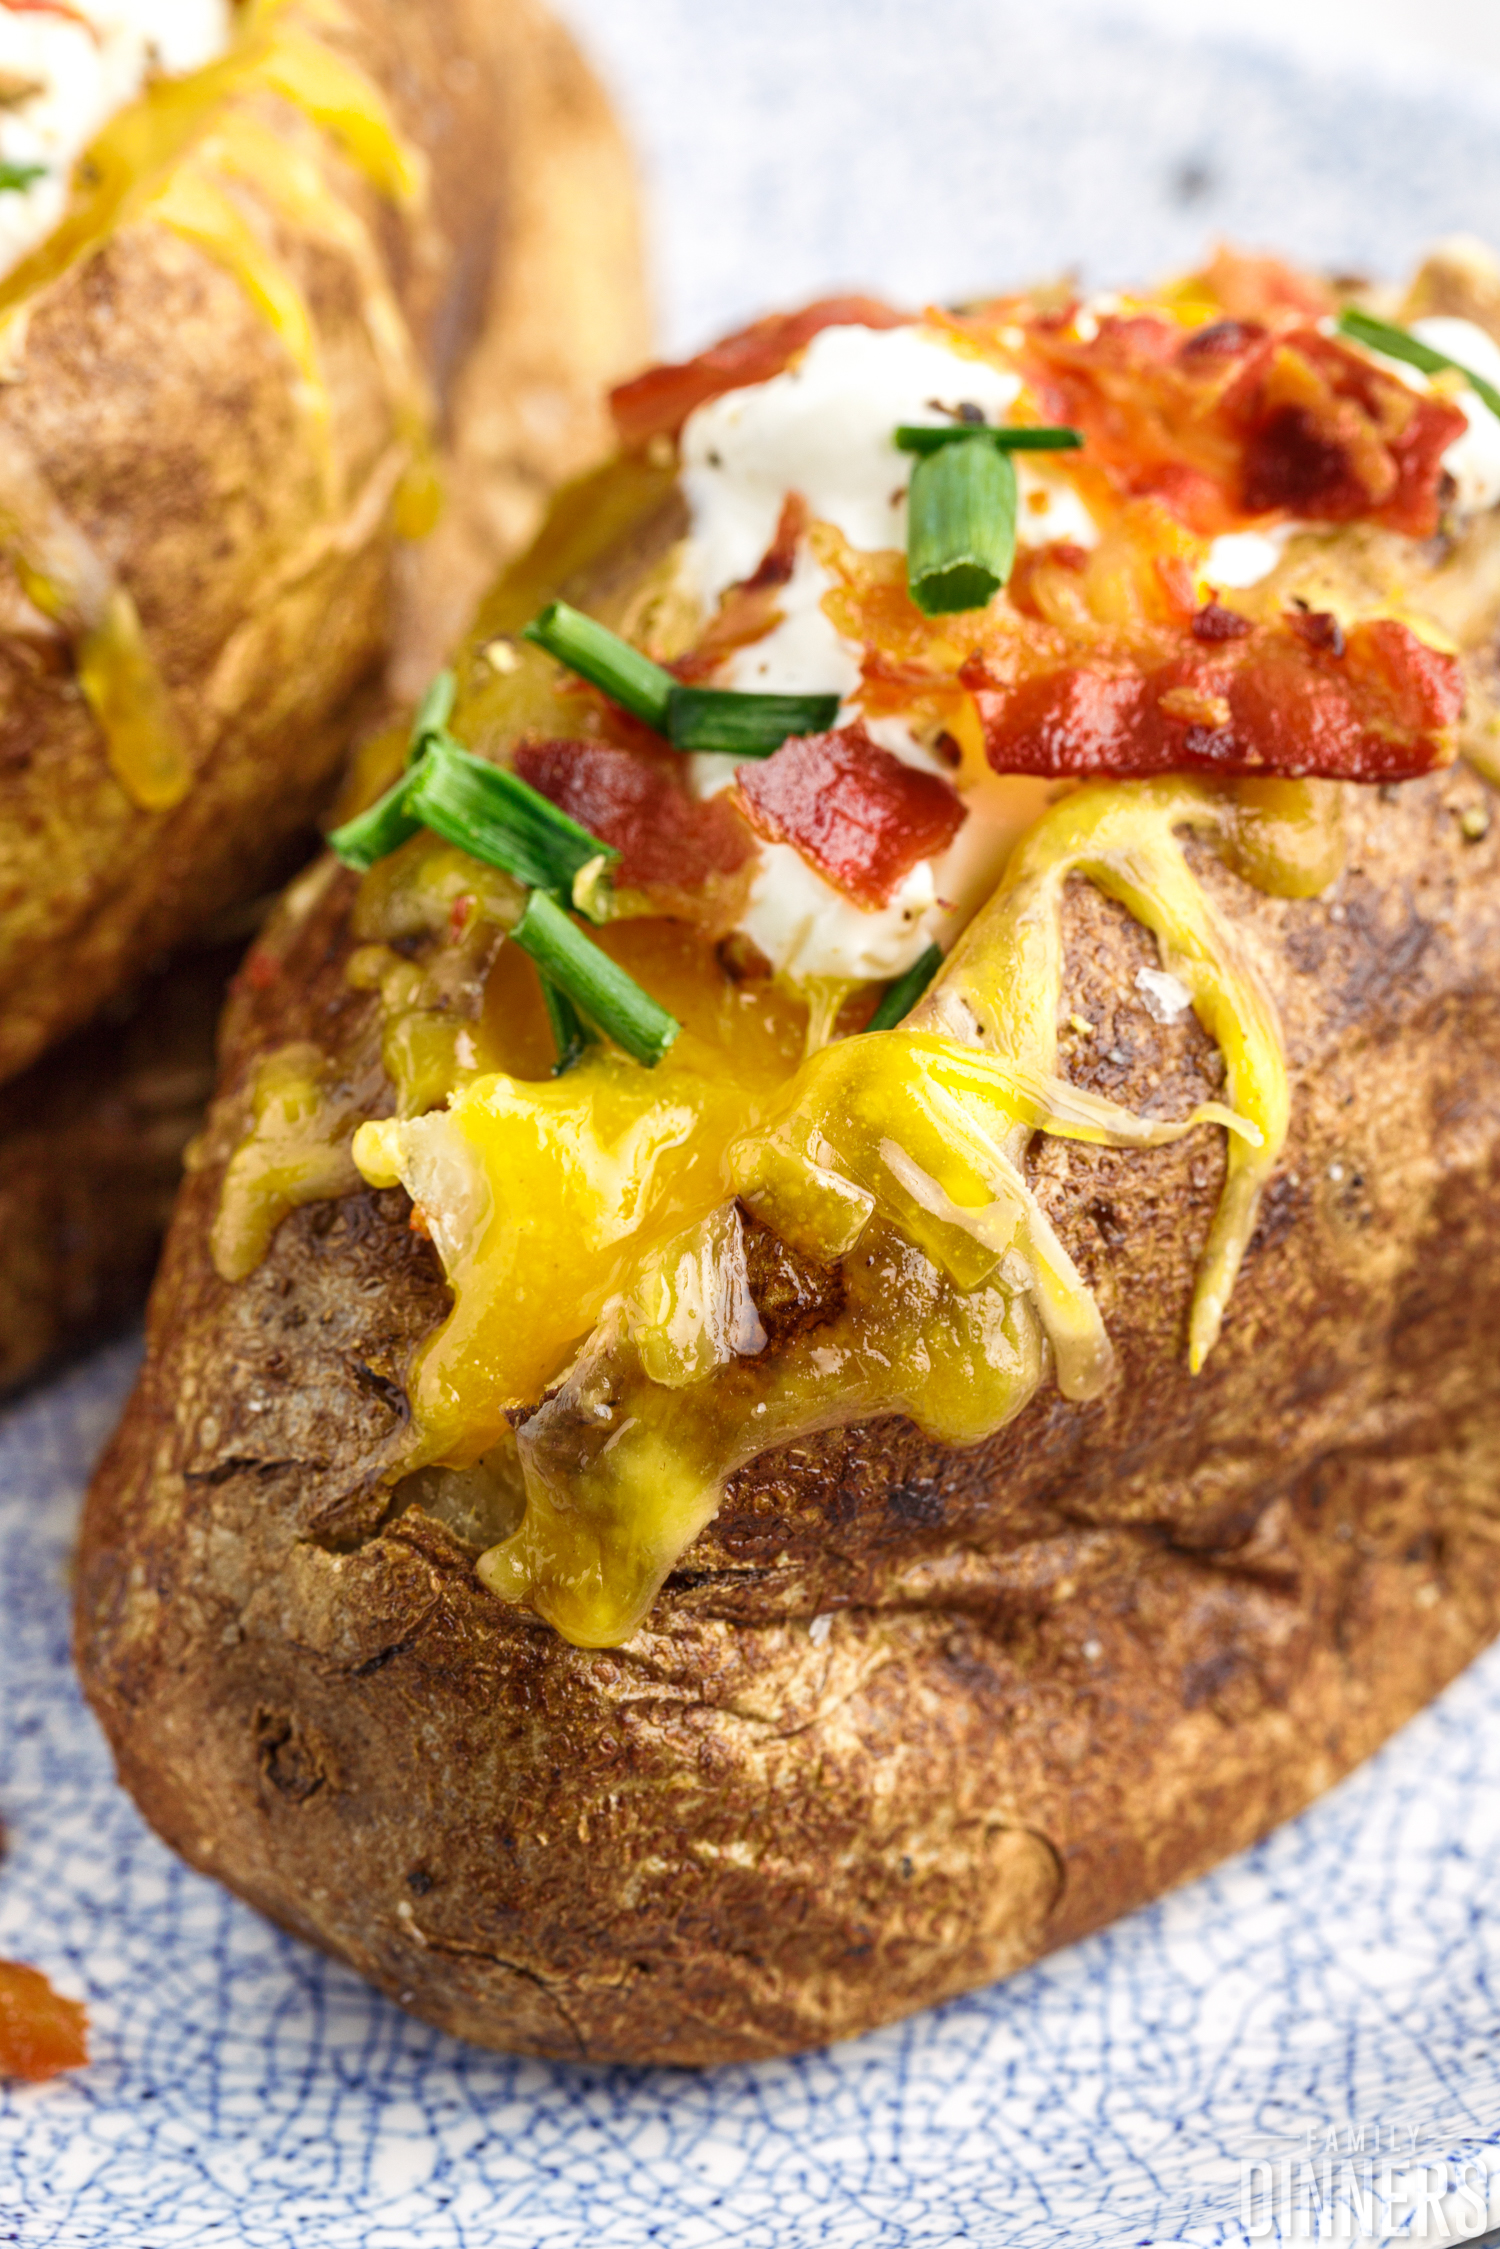 Close up of full baked potato cut open and topped with melted cheddar cheese, sour cream, bacon and pieces of green onion.